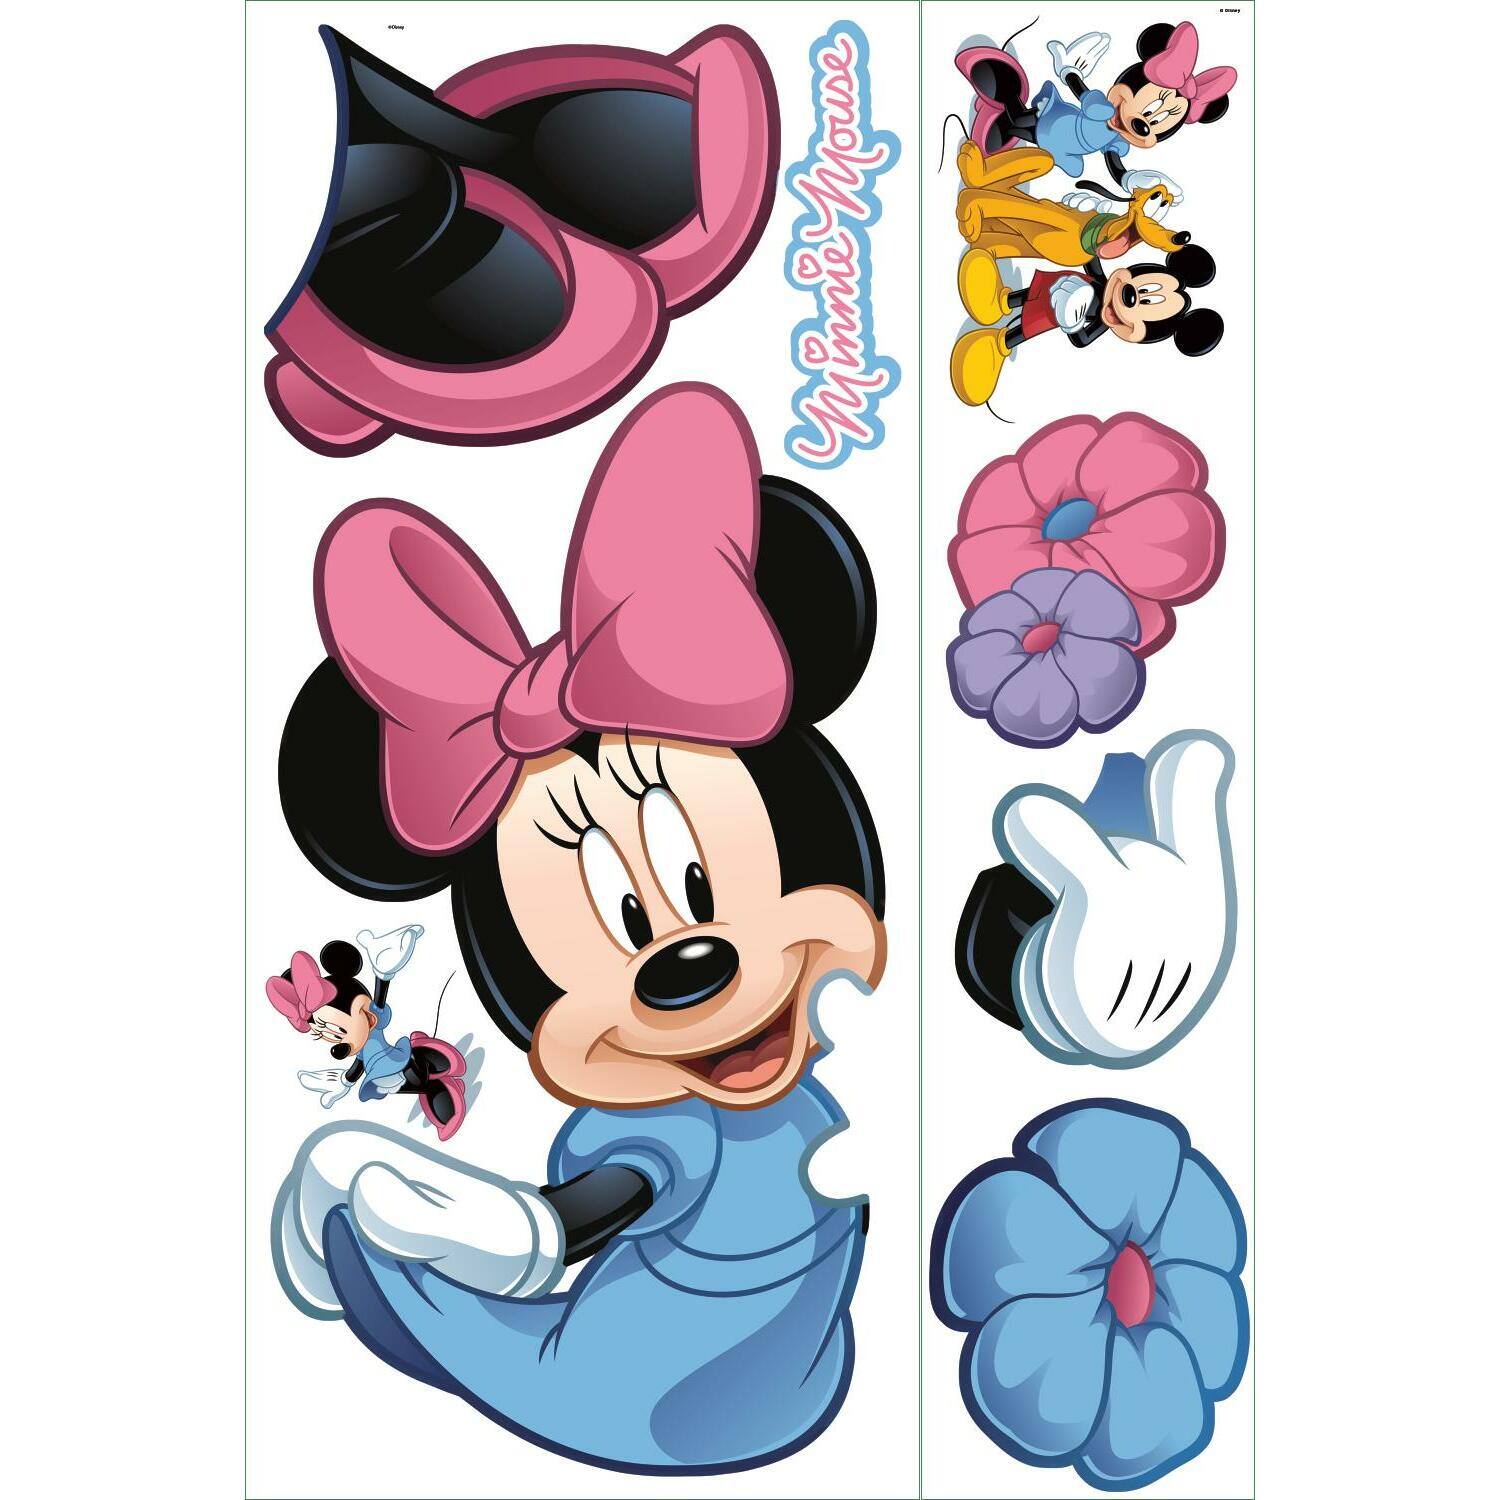 RoomMates Minnie Mouse Peel &#x26; Stick Giant Wall Decal